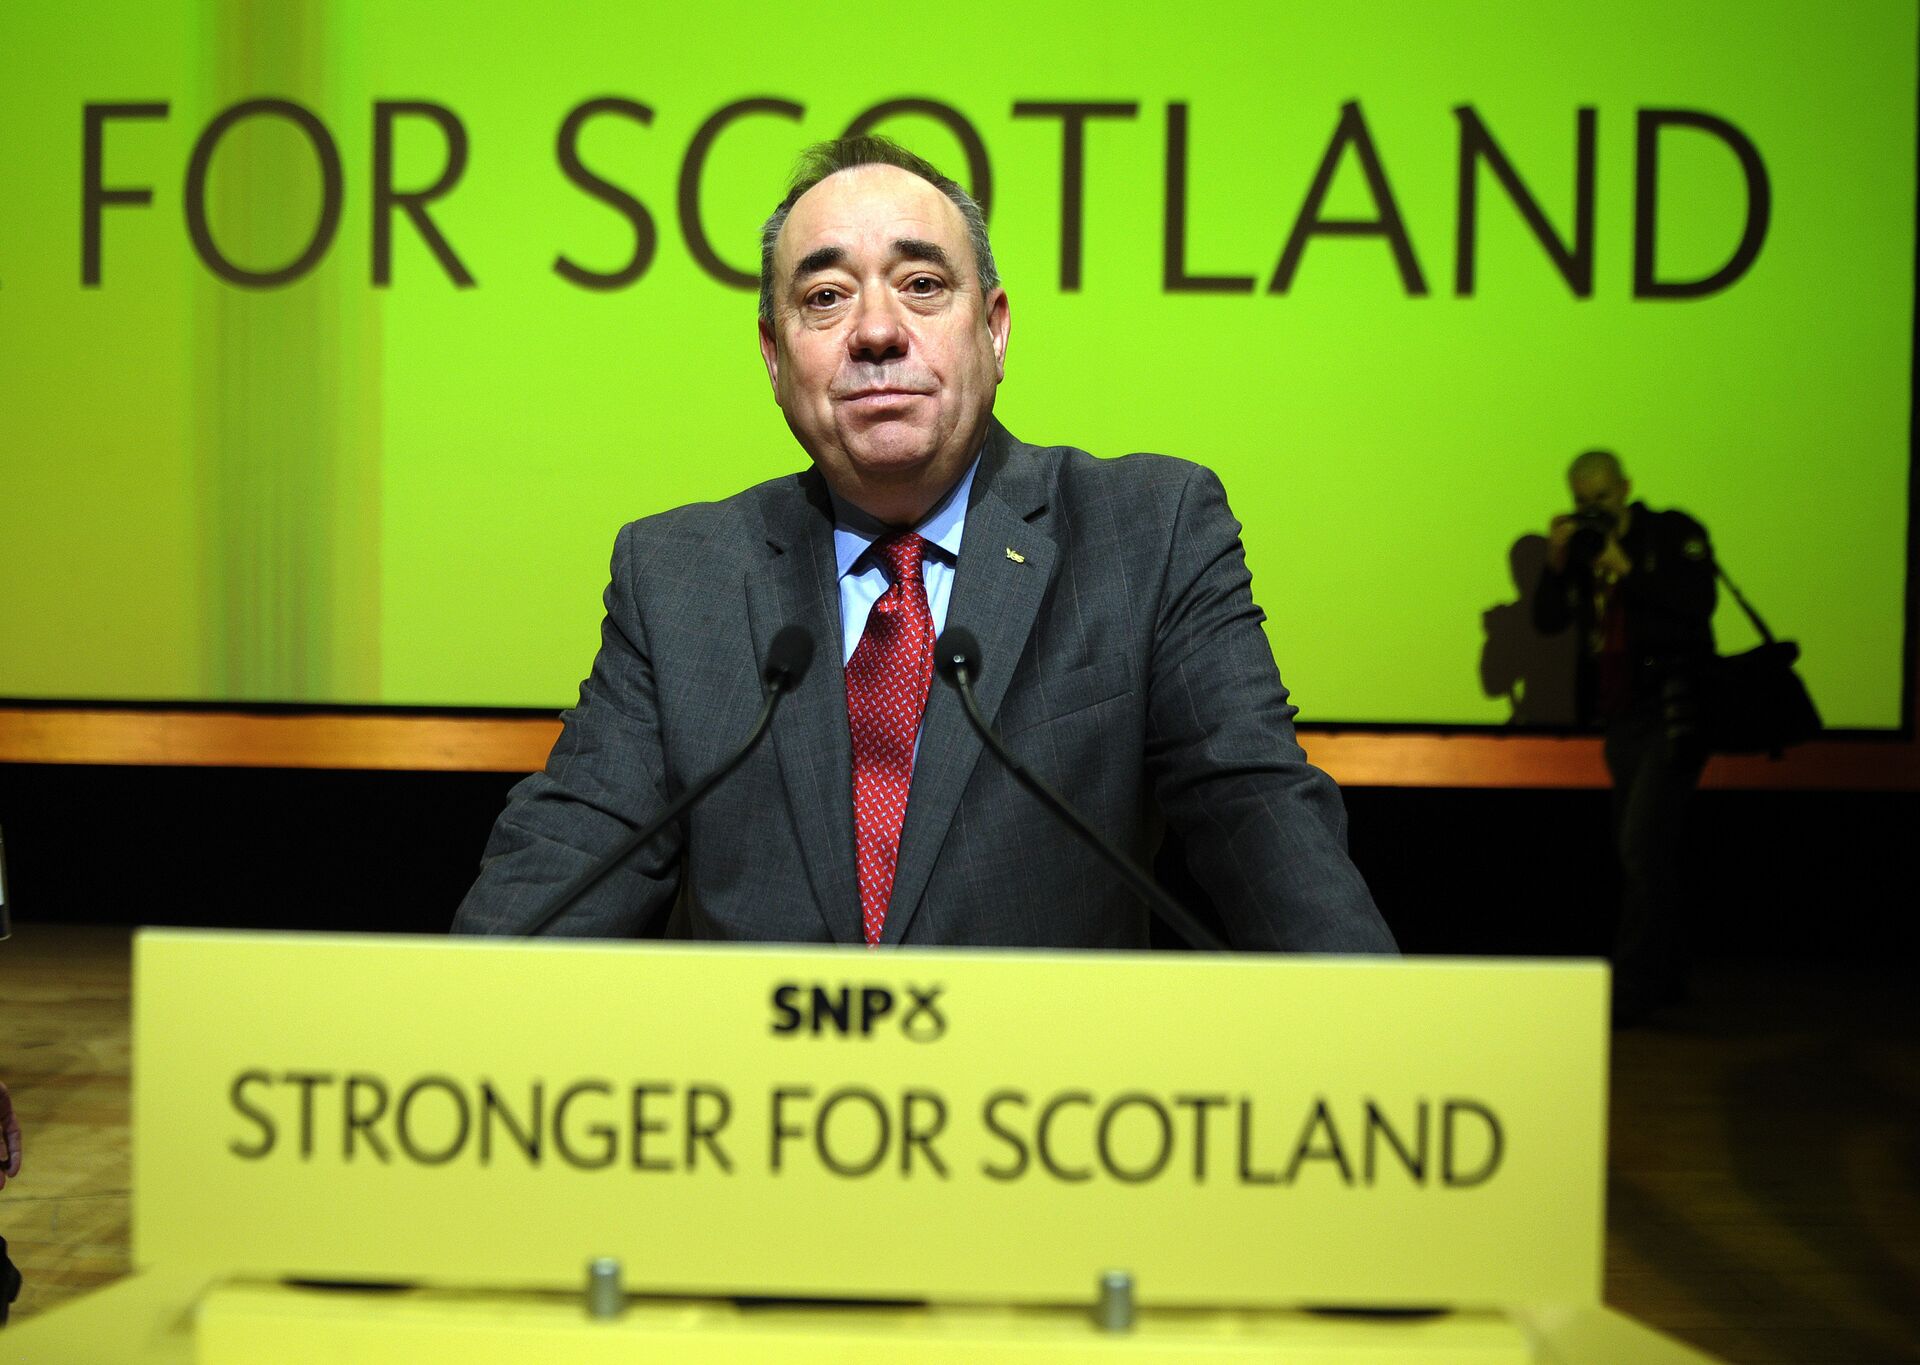 Nicola Sturgeon Says It Is 'Absurd' to Say She Was Out to Get Former SNP Leader Alex Salmond - Sputnik International, 1920, 03.03.2021